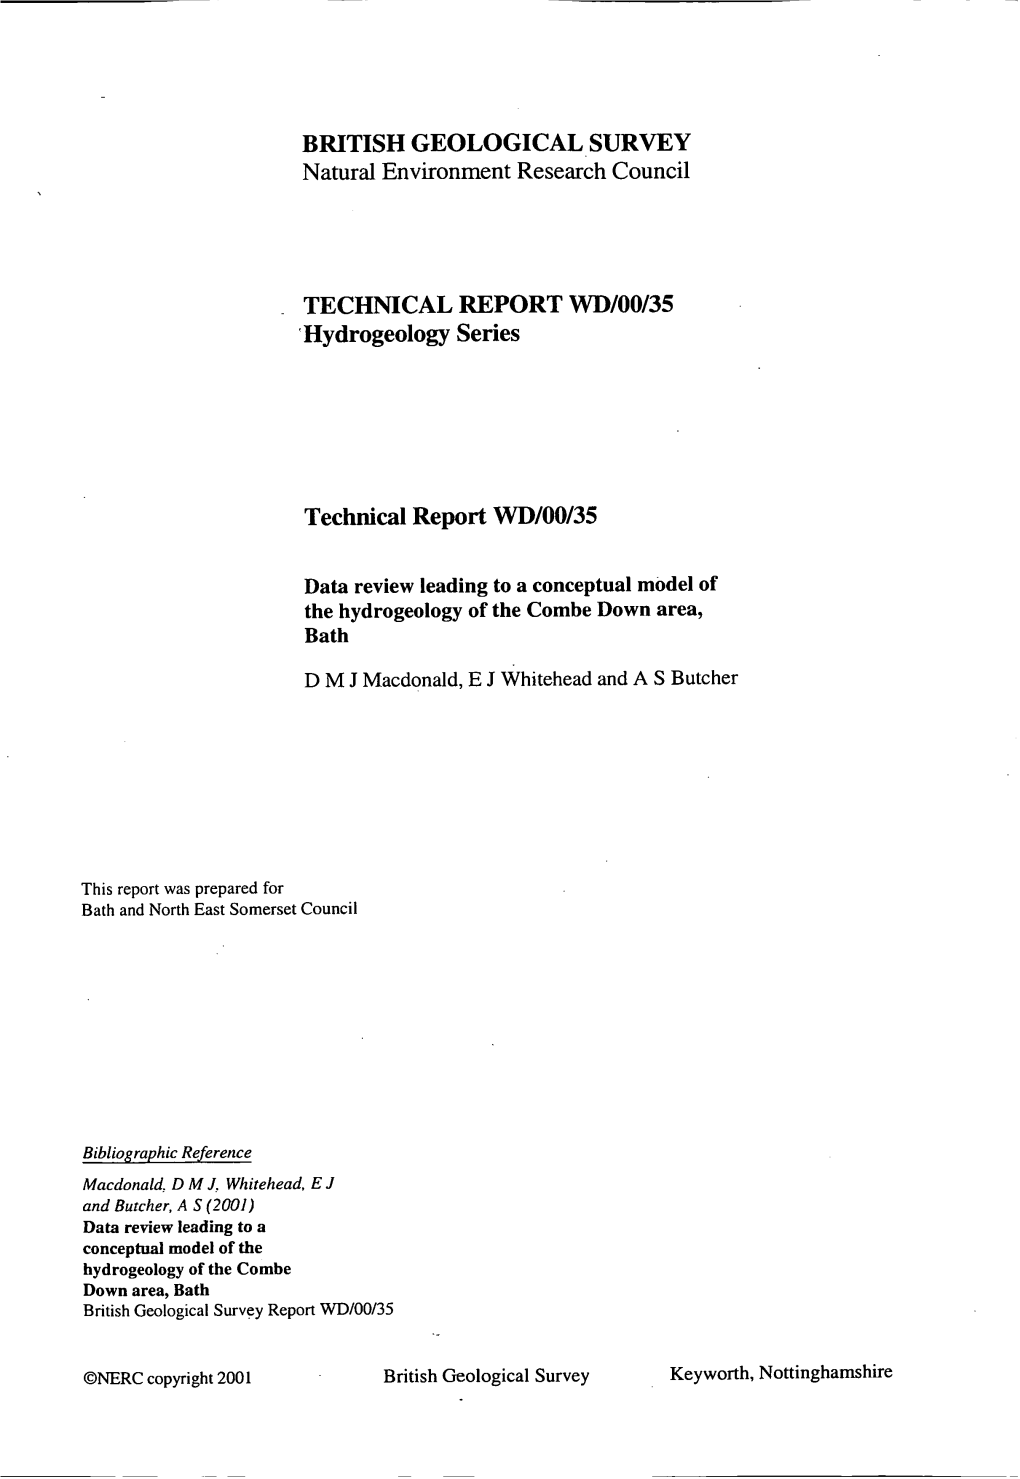 British Geological Survey Technical Report Wd/Oo/35